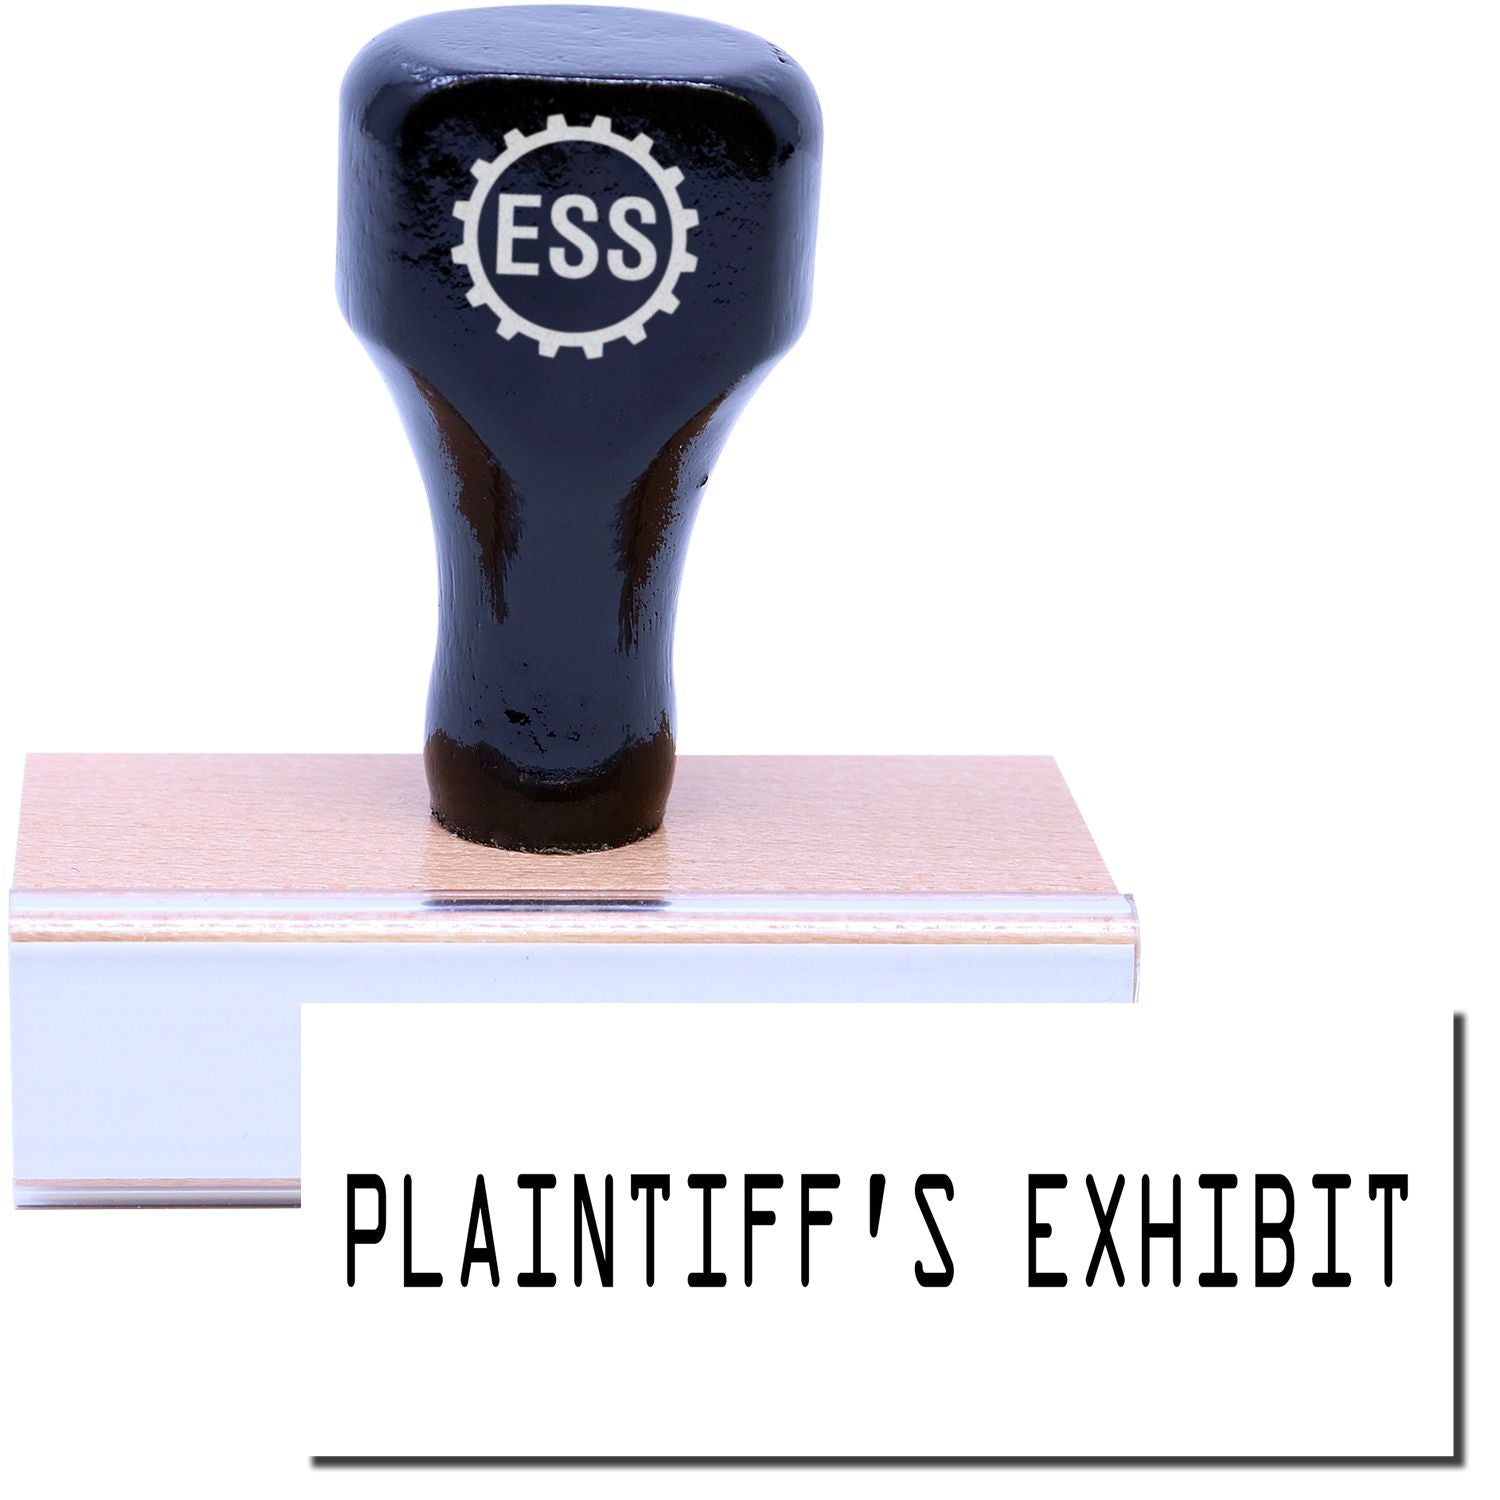 A stock office rubber stamp with a stamped image showing how the text "PLAINTIFF'S EXHIBIT" in a large font is displayed after stamping.